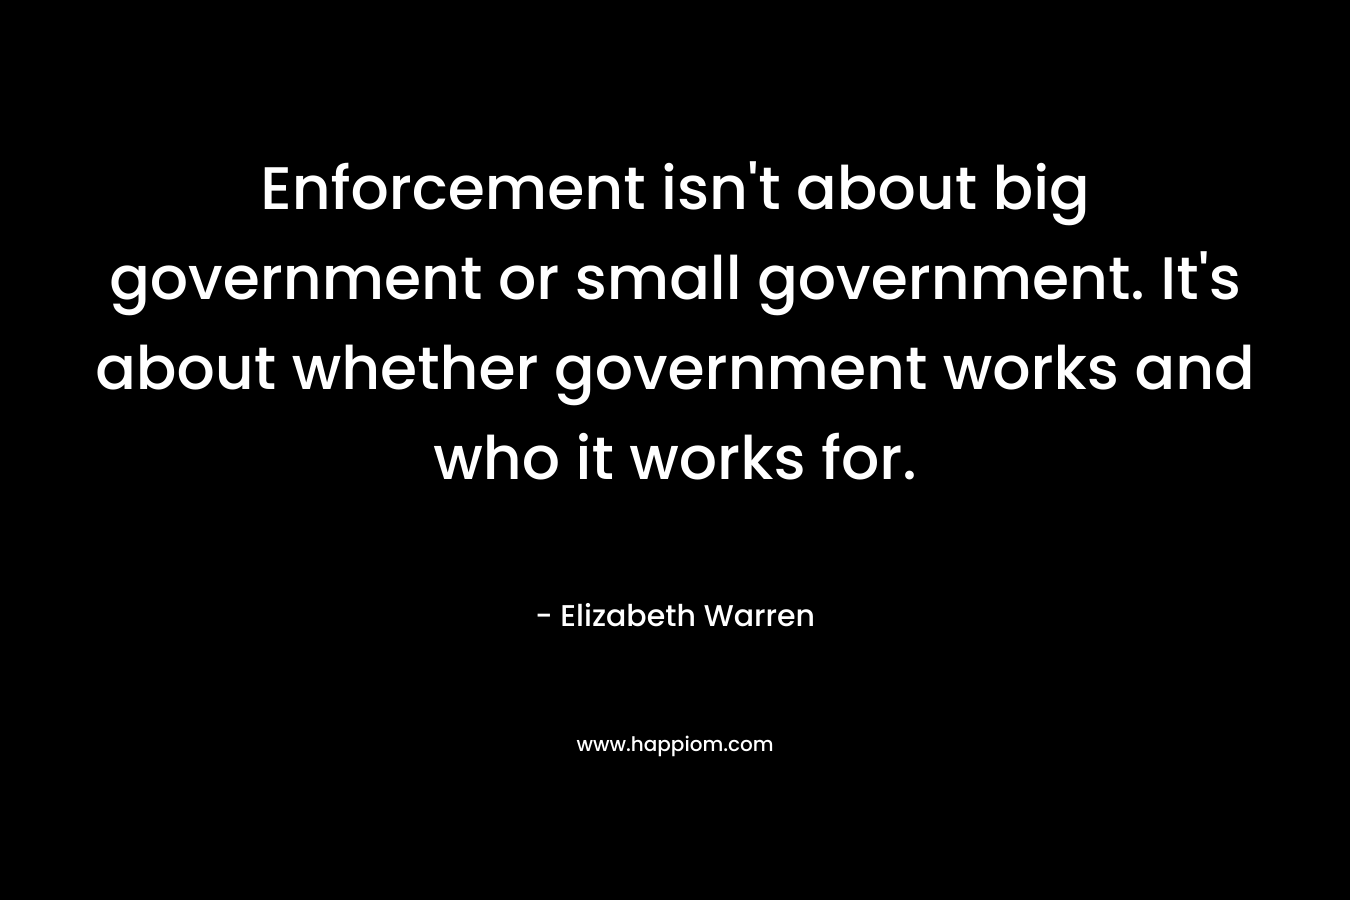 Enforcement isn’t about big government or small government. It’s about whether government works and who it works for. – Elizabeth Warren